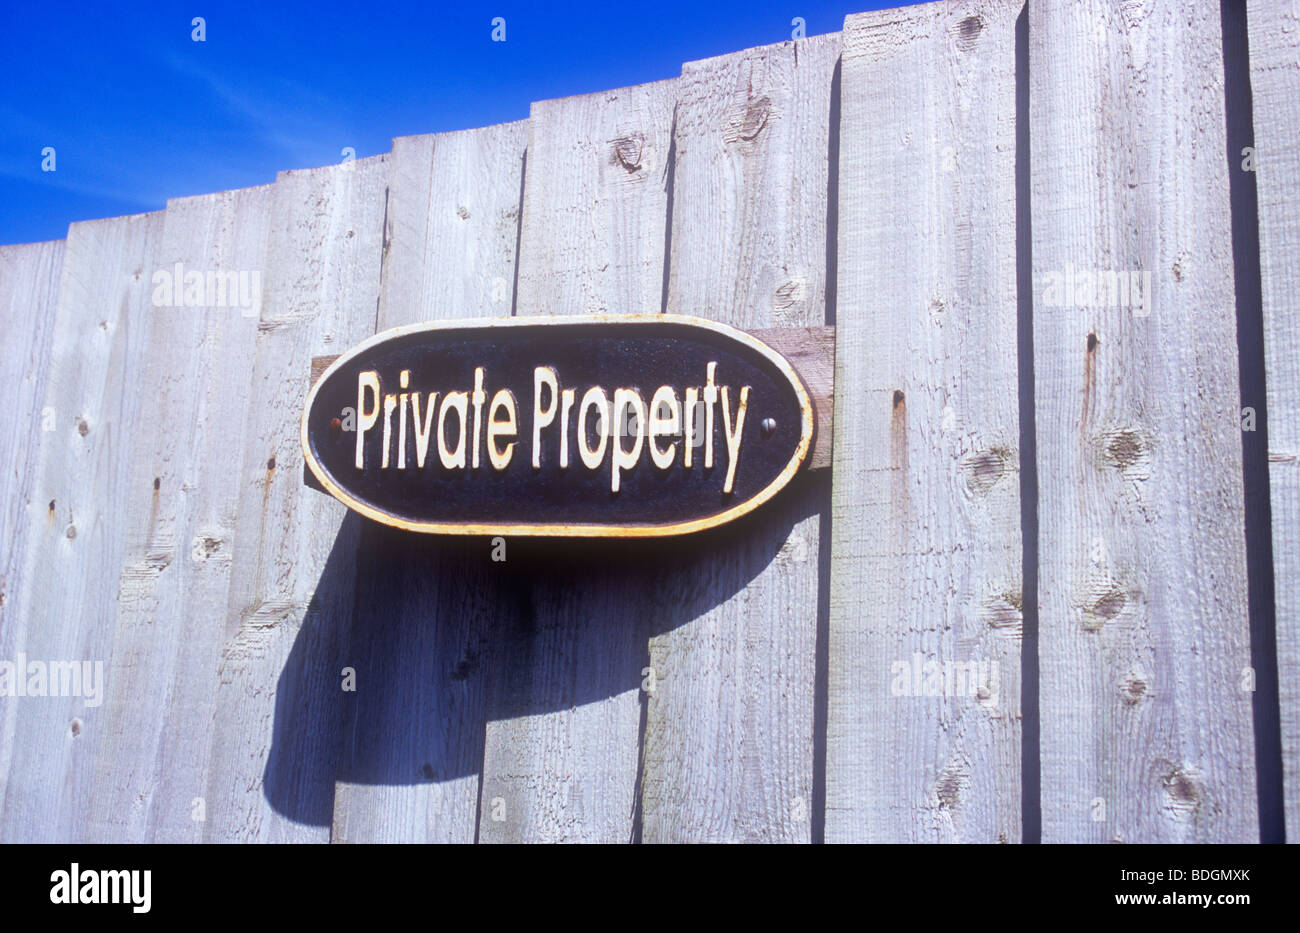 Oval cast metal sign fixed on wooden fence under blue sky casting shadow and stating Private Property Stock Photo